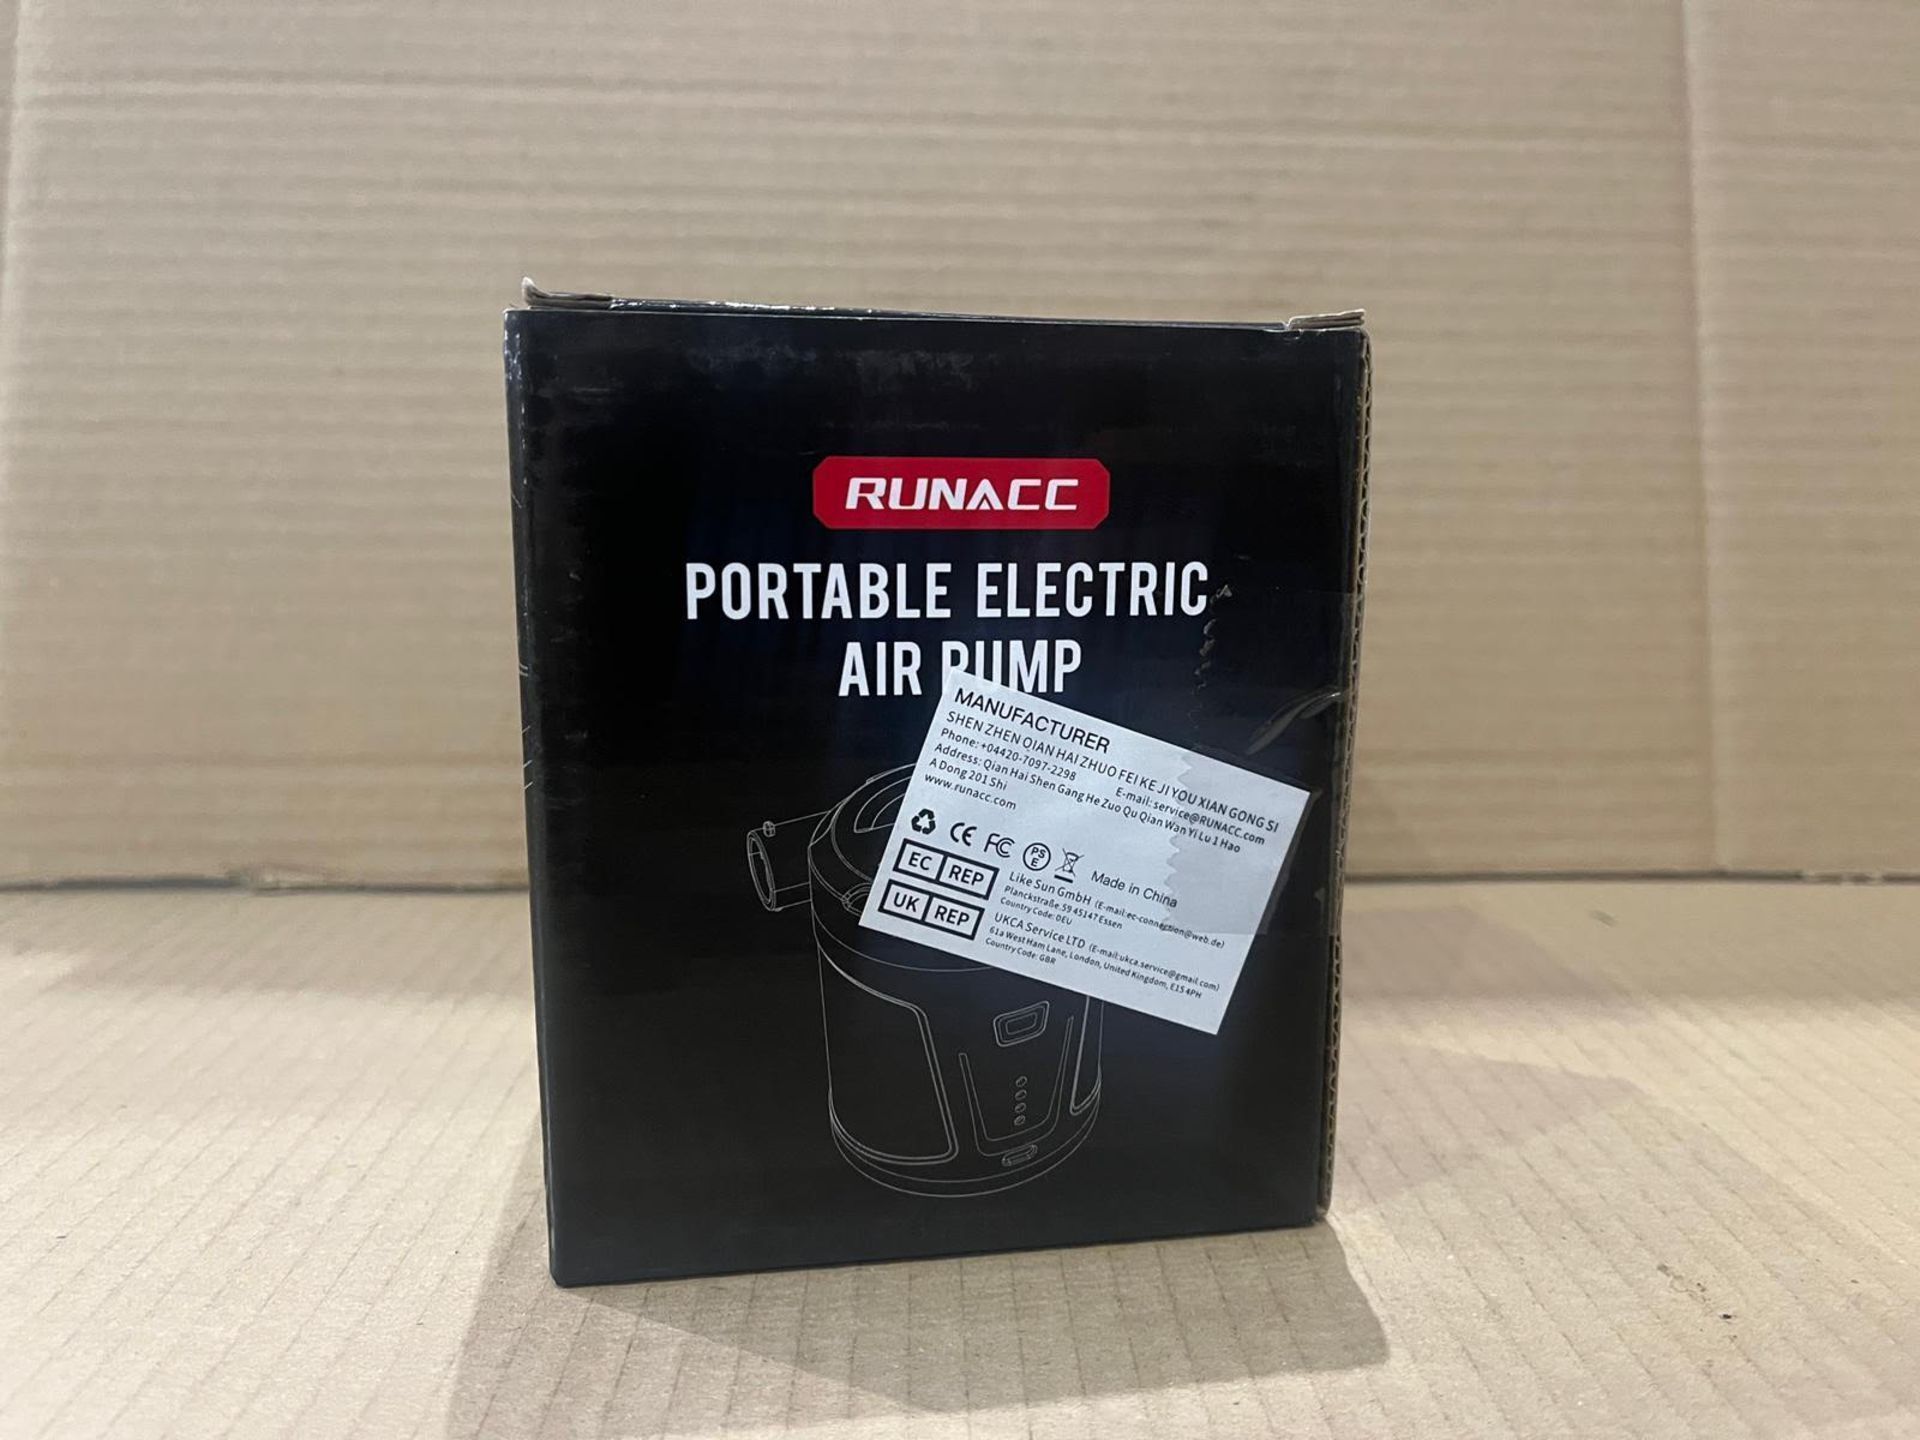 12 X BRAND NEW PORTABLE ELECTRIC AIR PUMPS WITH 3 NOZZLES R15